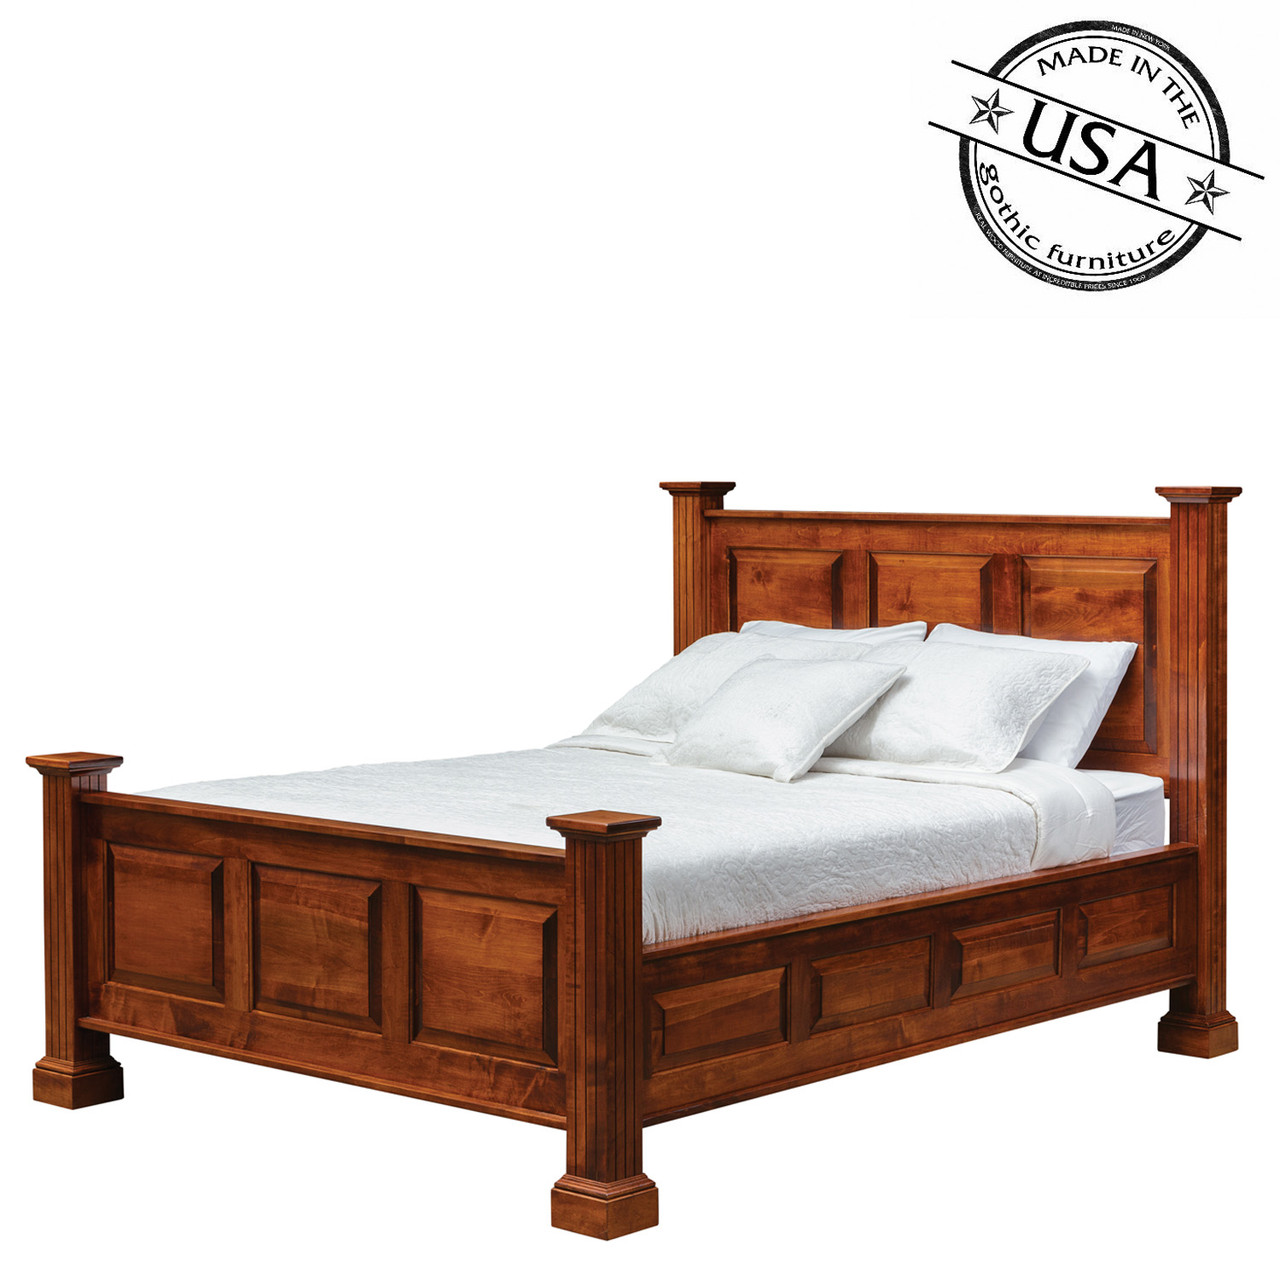 King Size Rainsville Solid Cherry Bed | Gothic Furniture